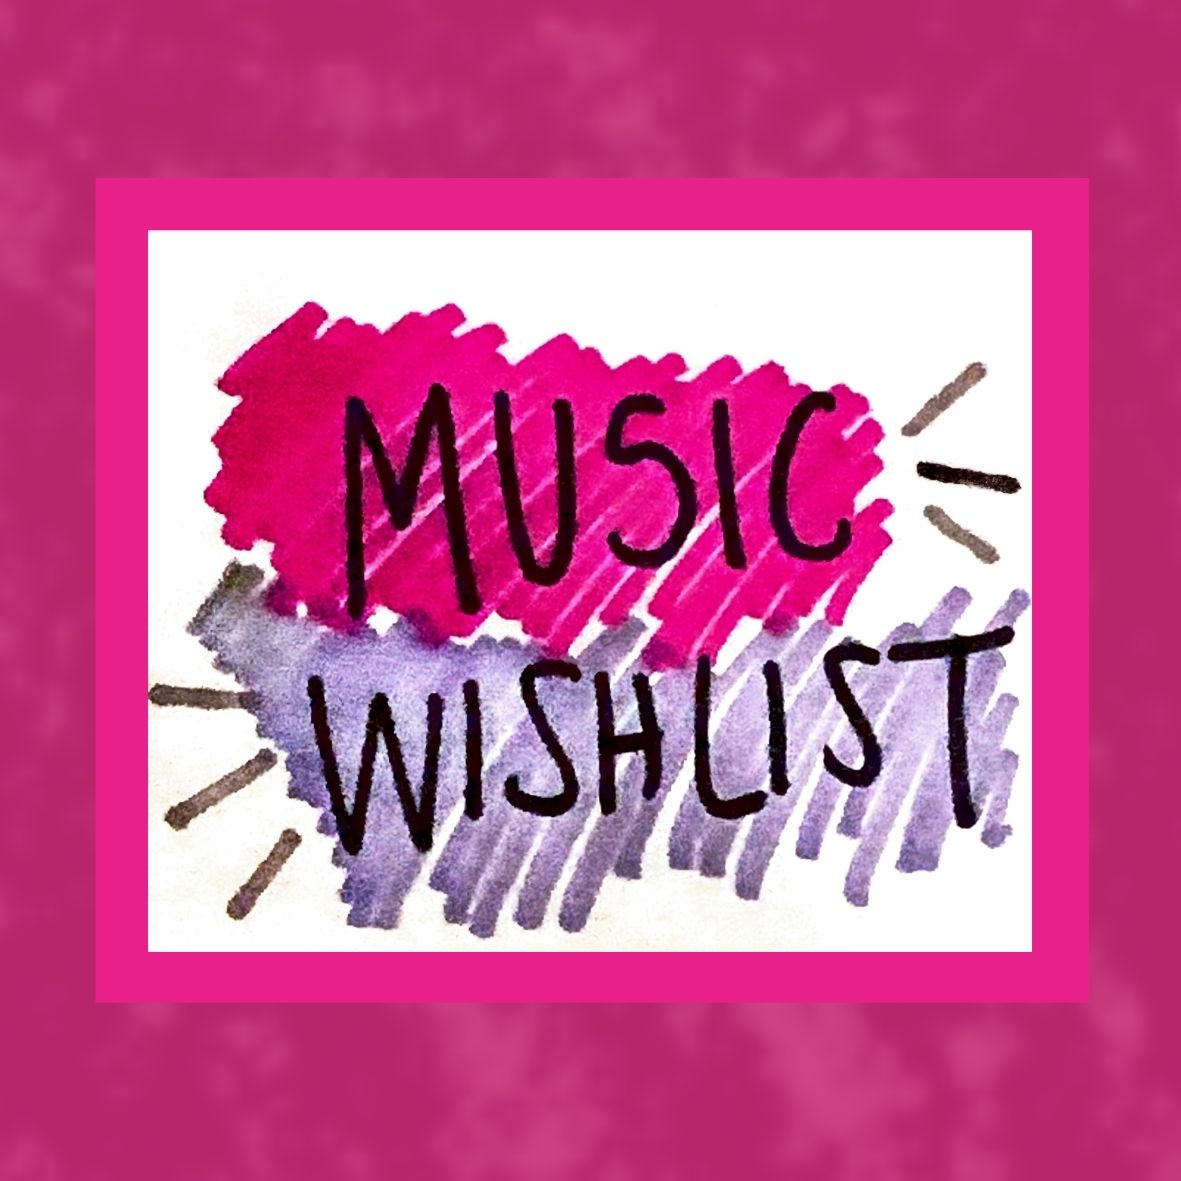 Handwritten text that reads "Music Wishlist" in black ink. The word music is surrounded by a hot pink blob colored by marker, and the word wishlist is surrounded by a purple blob also colored by marker. This has a white border and then two hot pink borders varying in shade